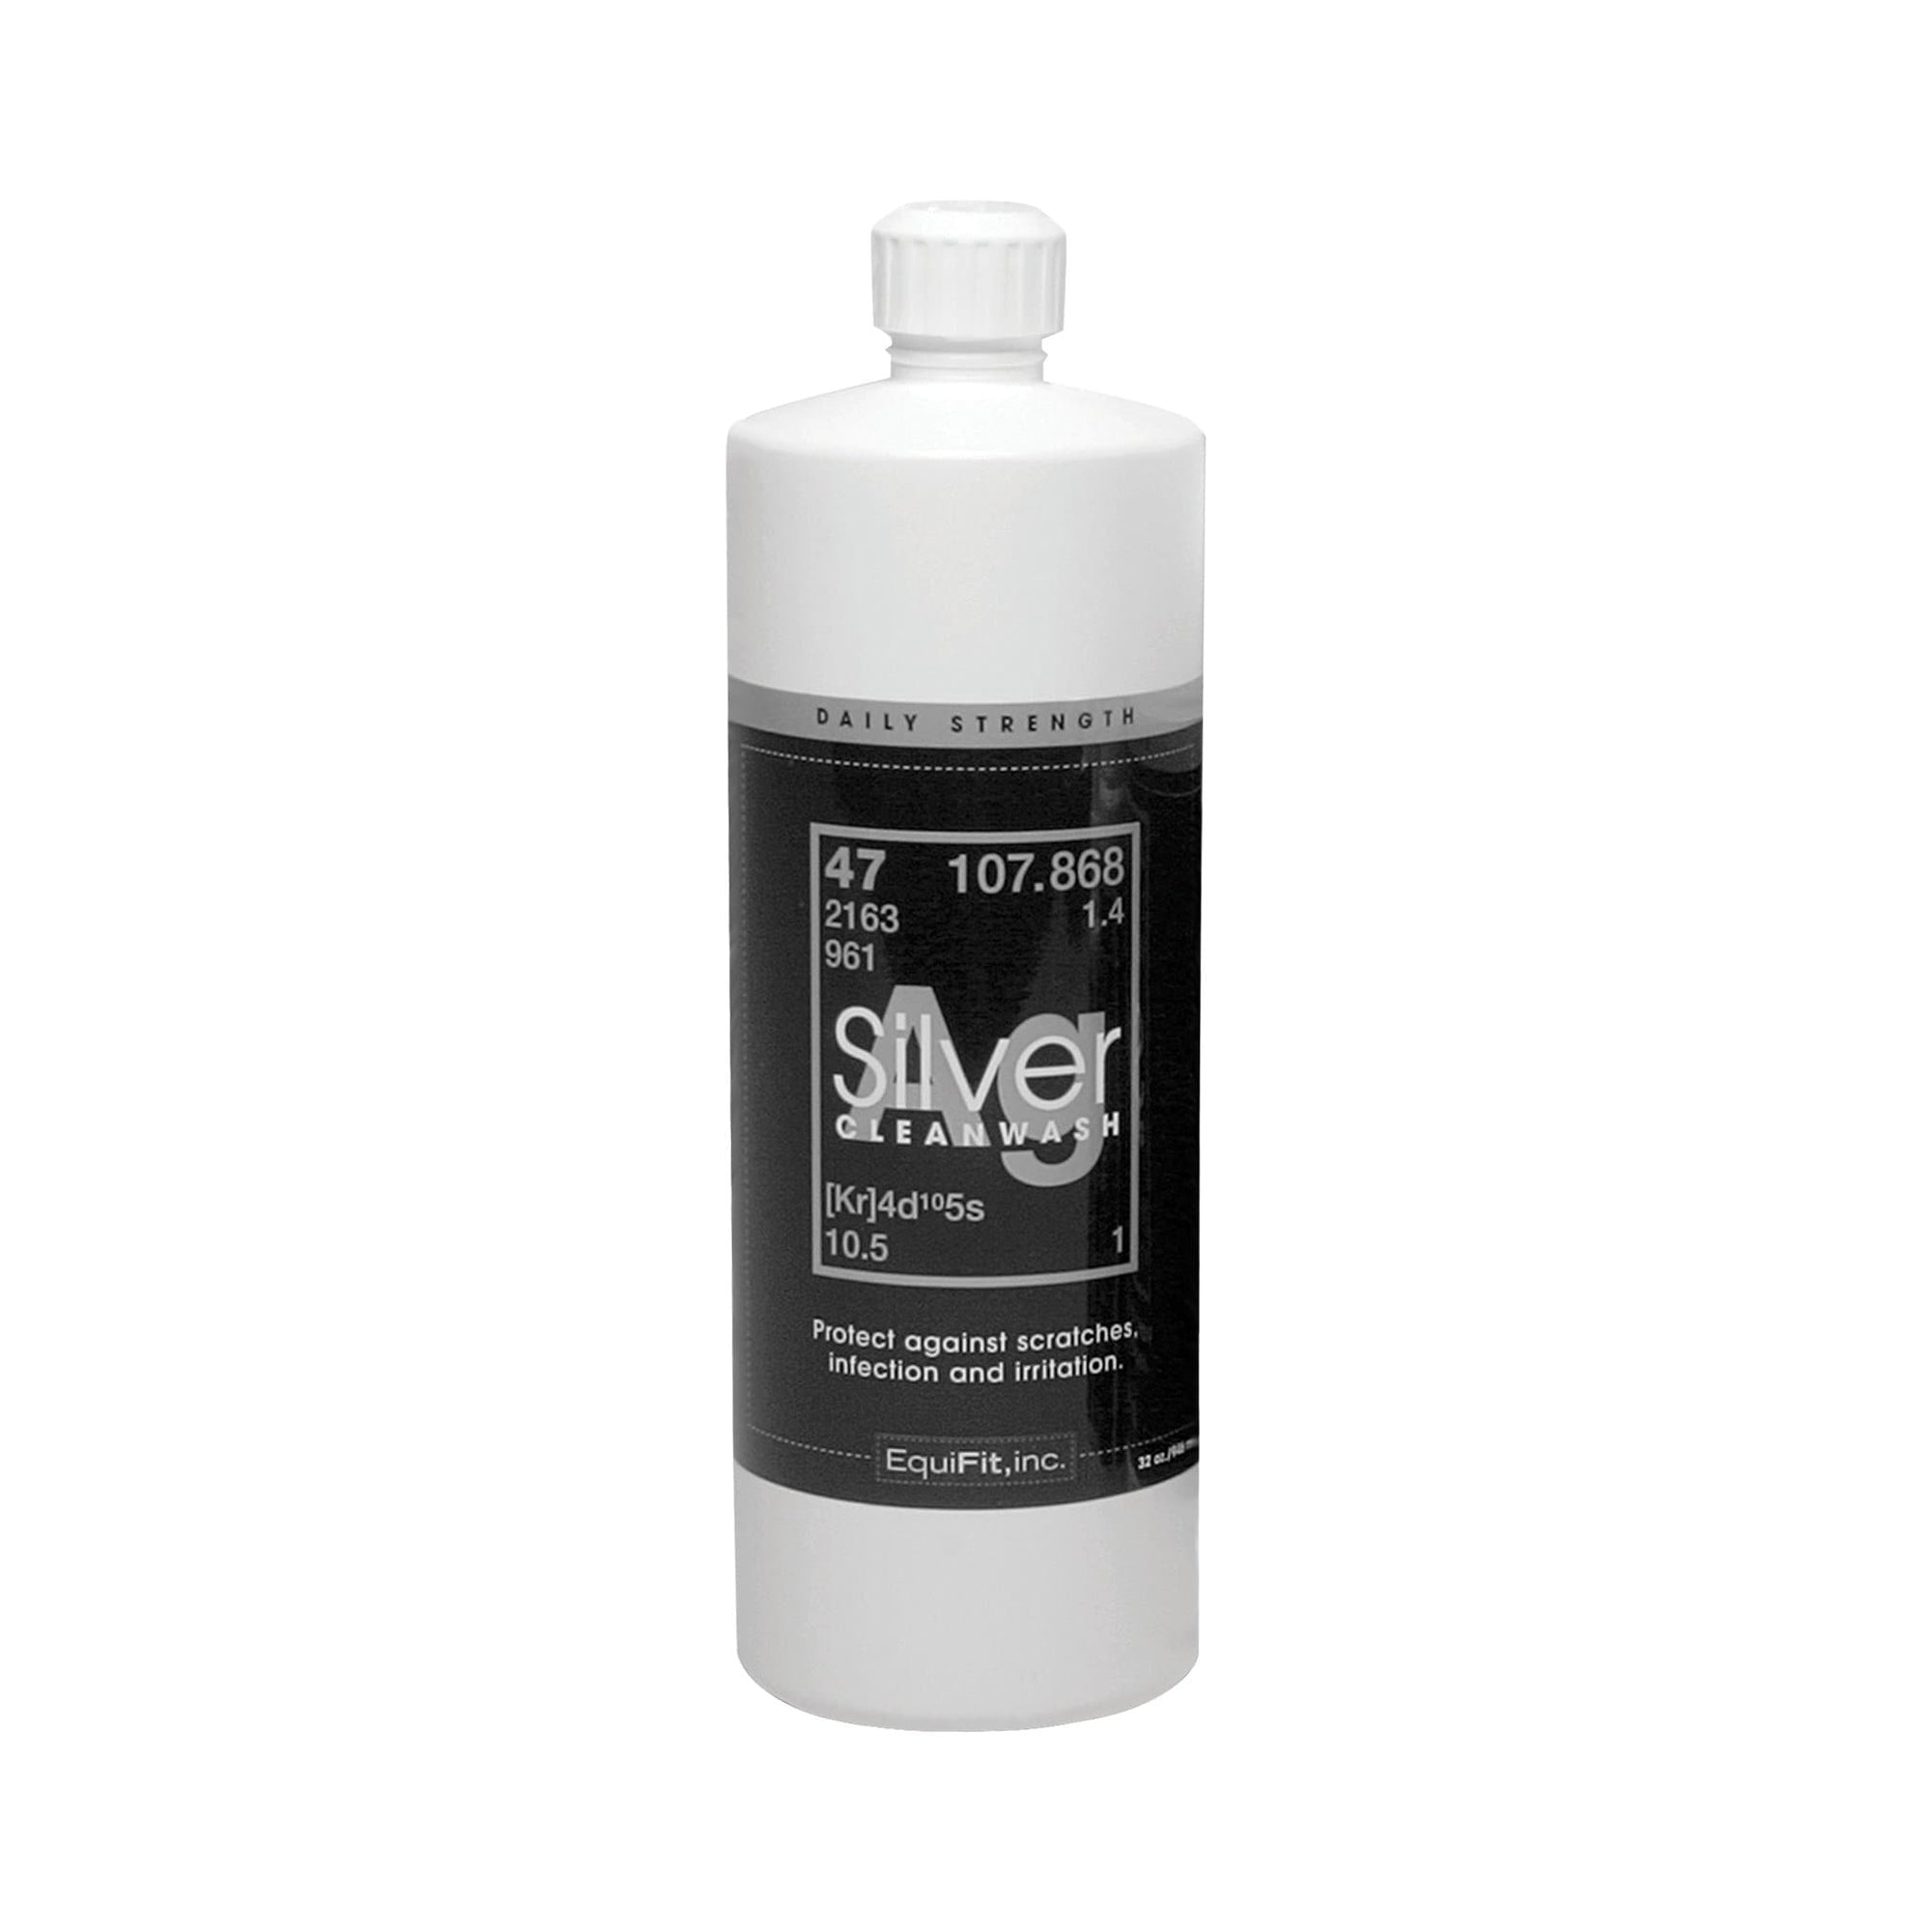 AgSilver CleanWash is a therapeutic shampoo for horses to aid in the prevention of bacteria and fungus known for causing irritations such as rain rot, scratches, ringworm and thrush.